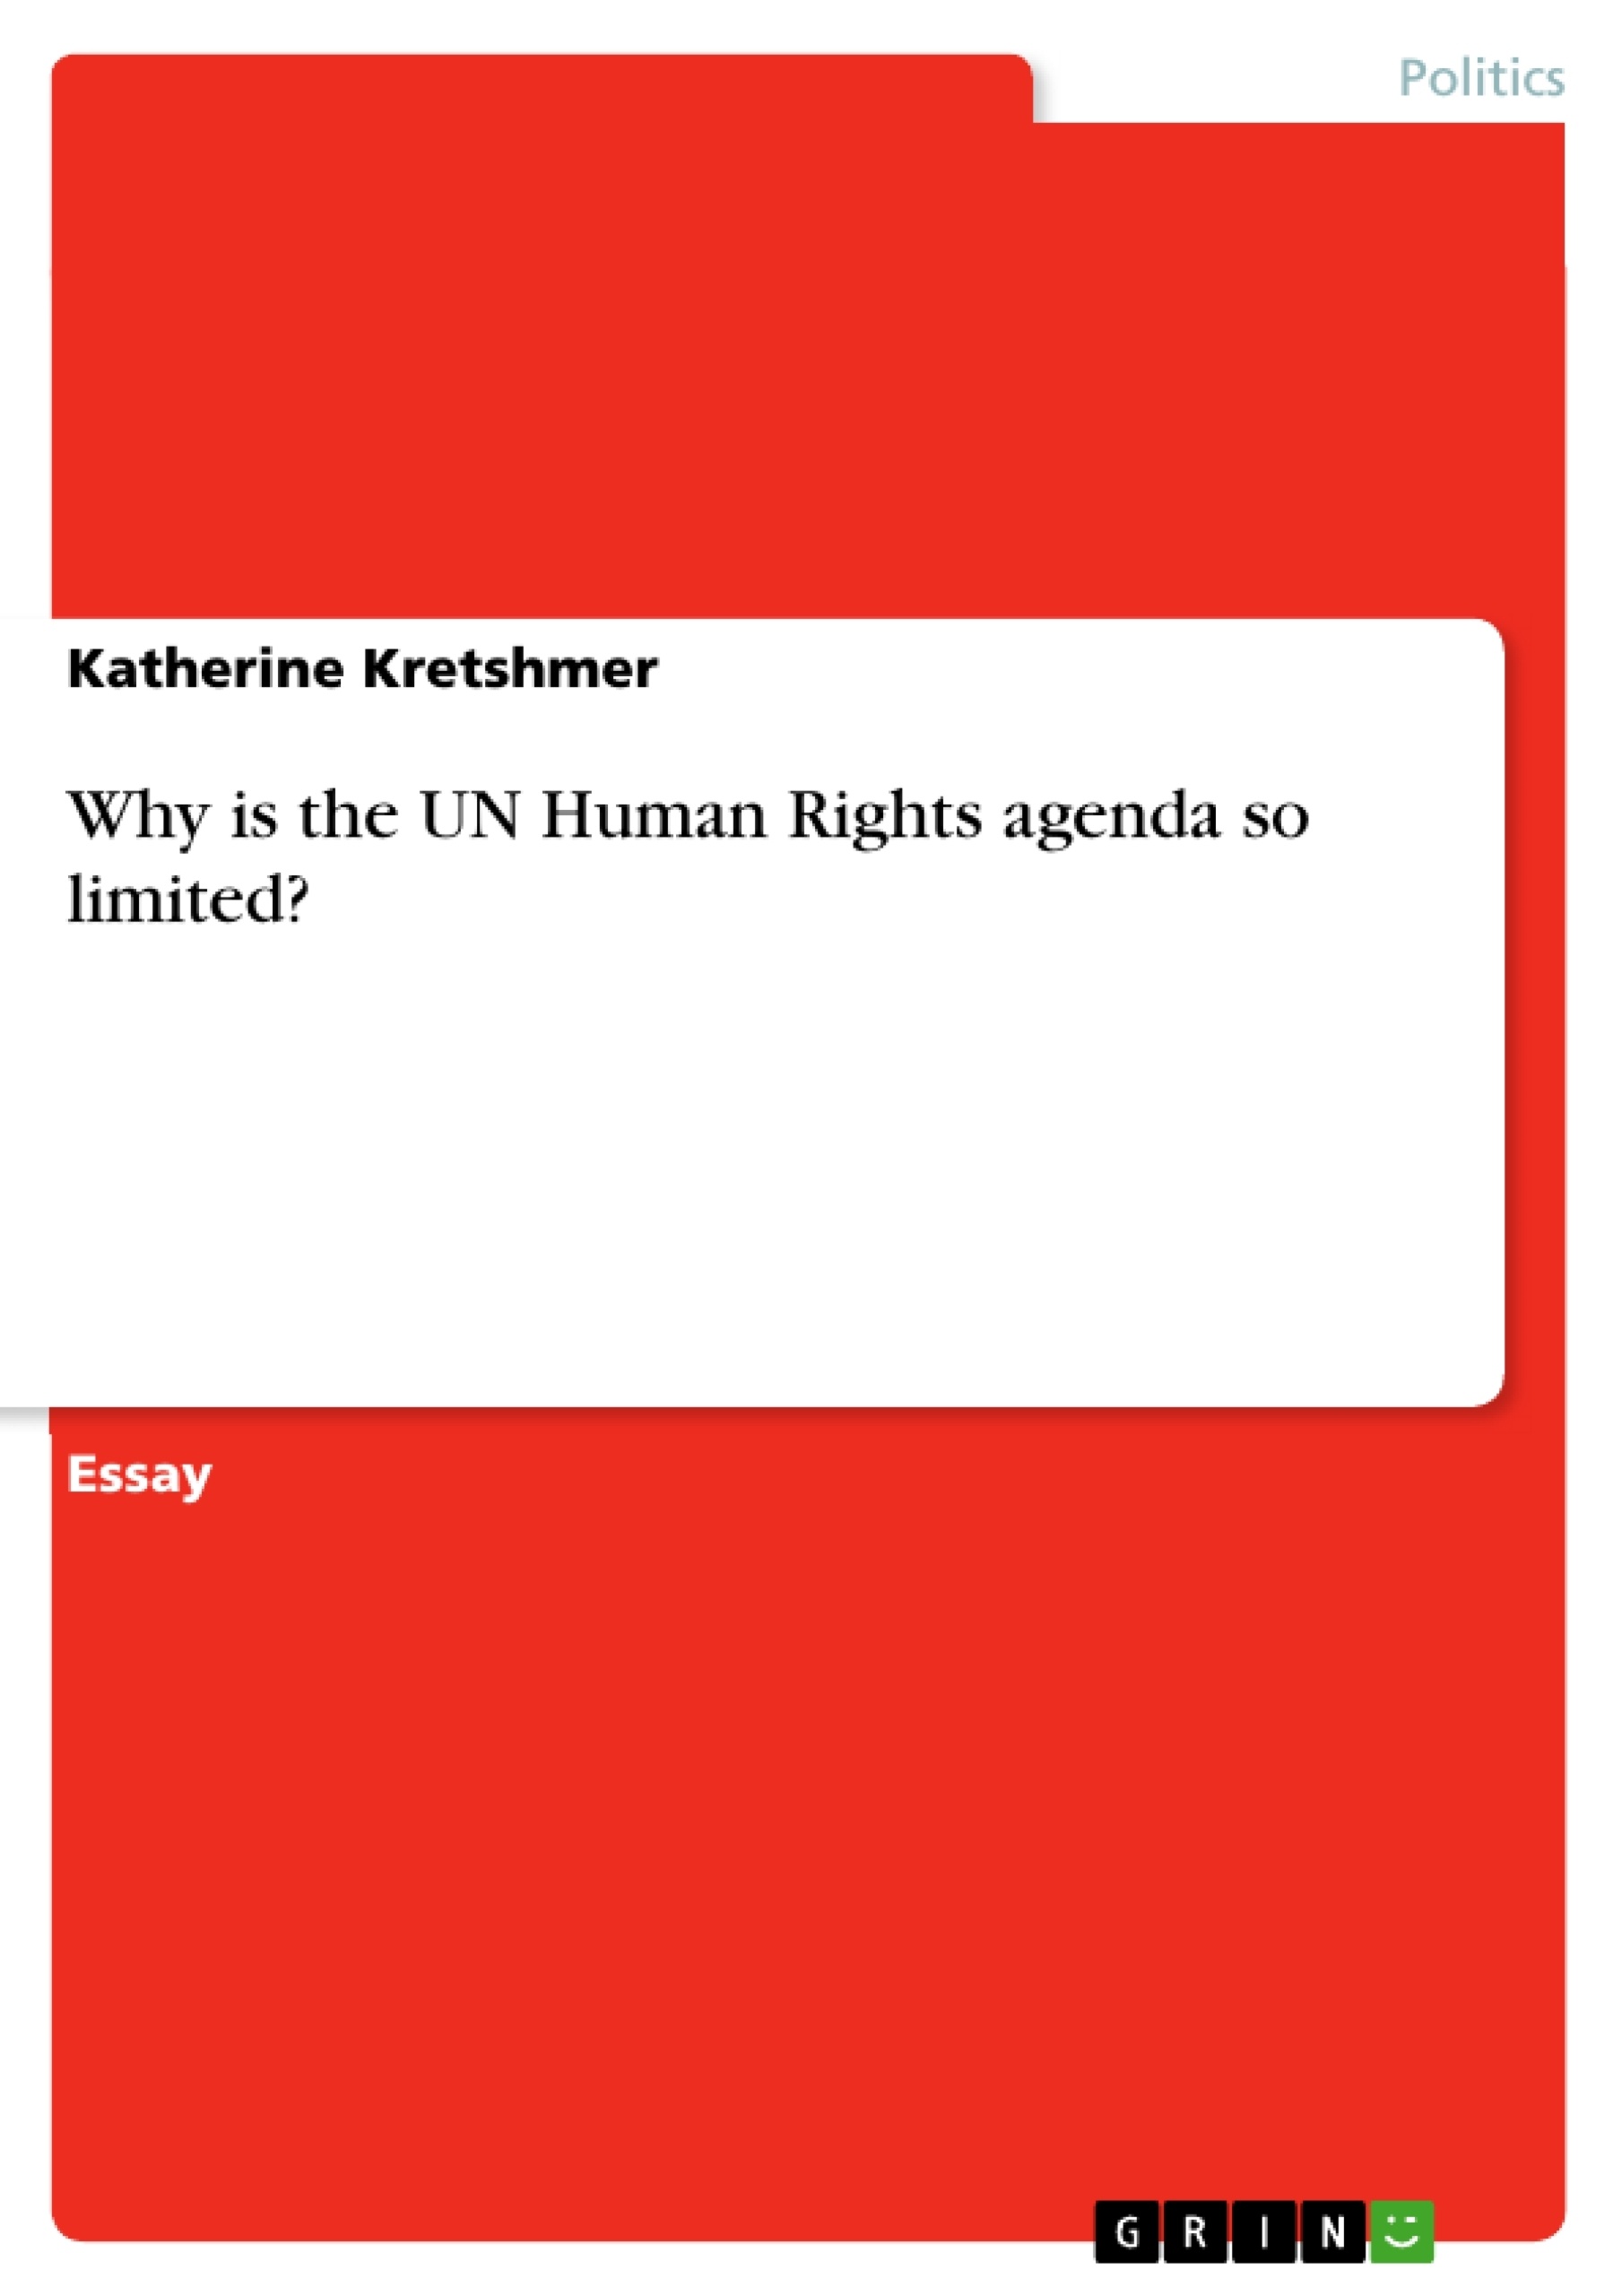 Title: Why is the UN Human Rights agenda so limited?